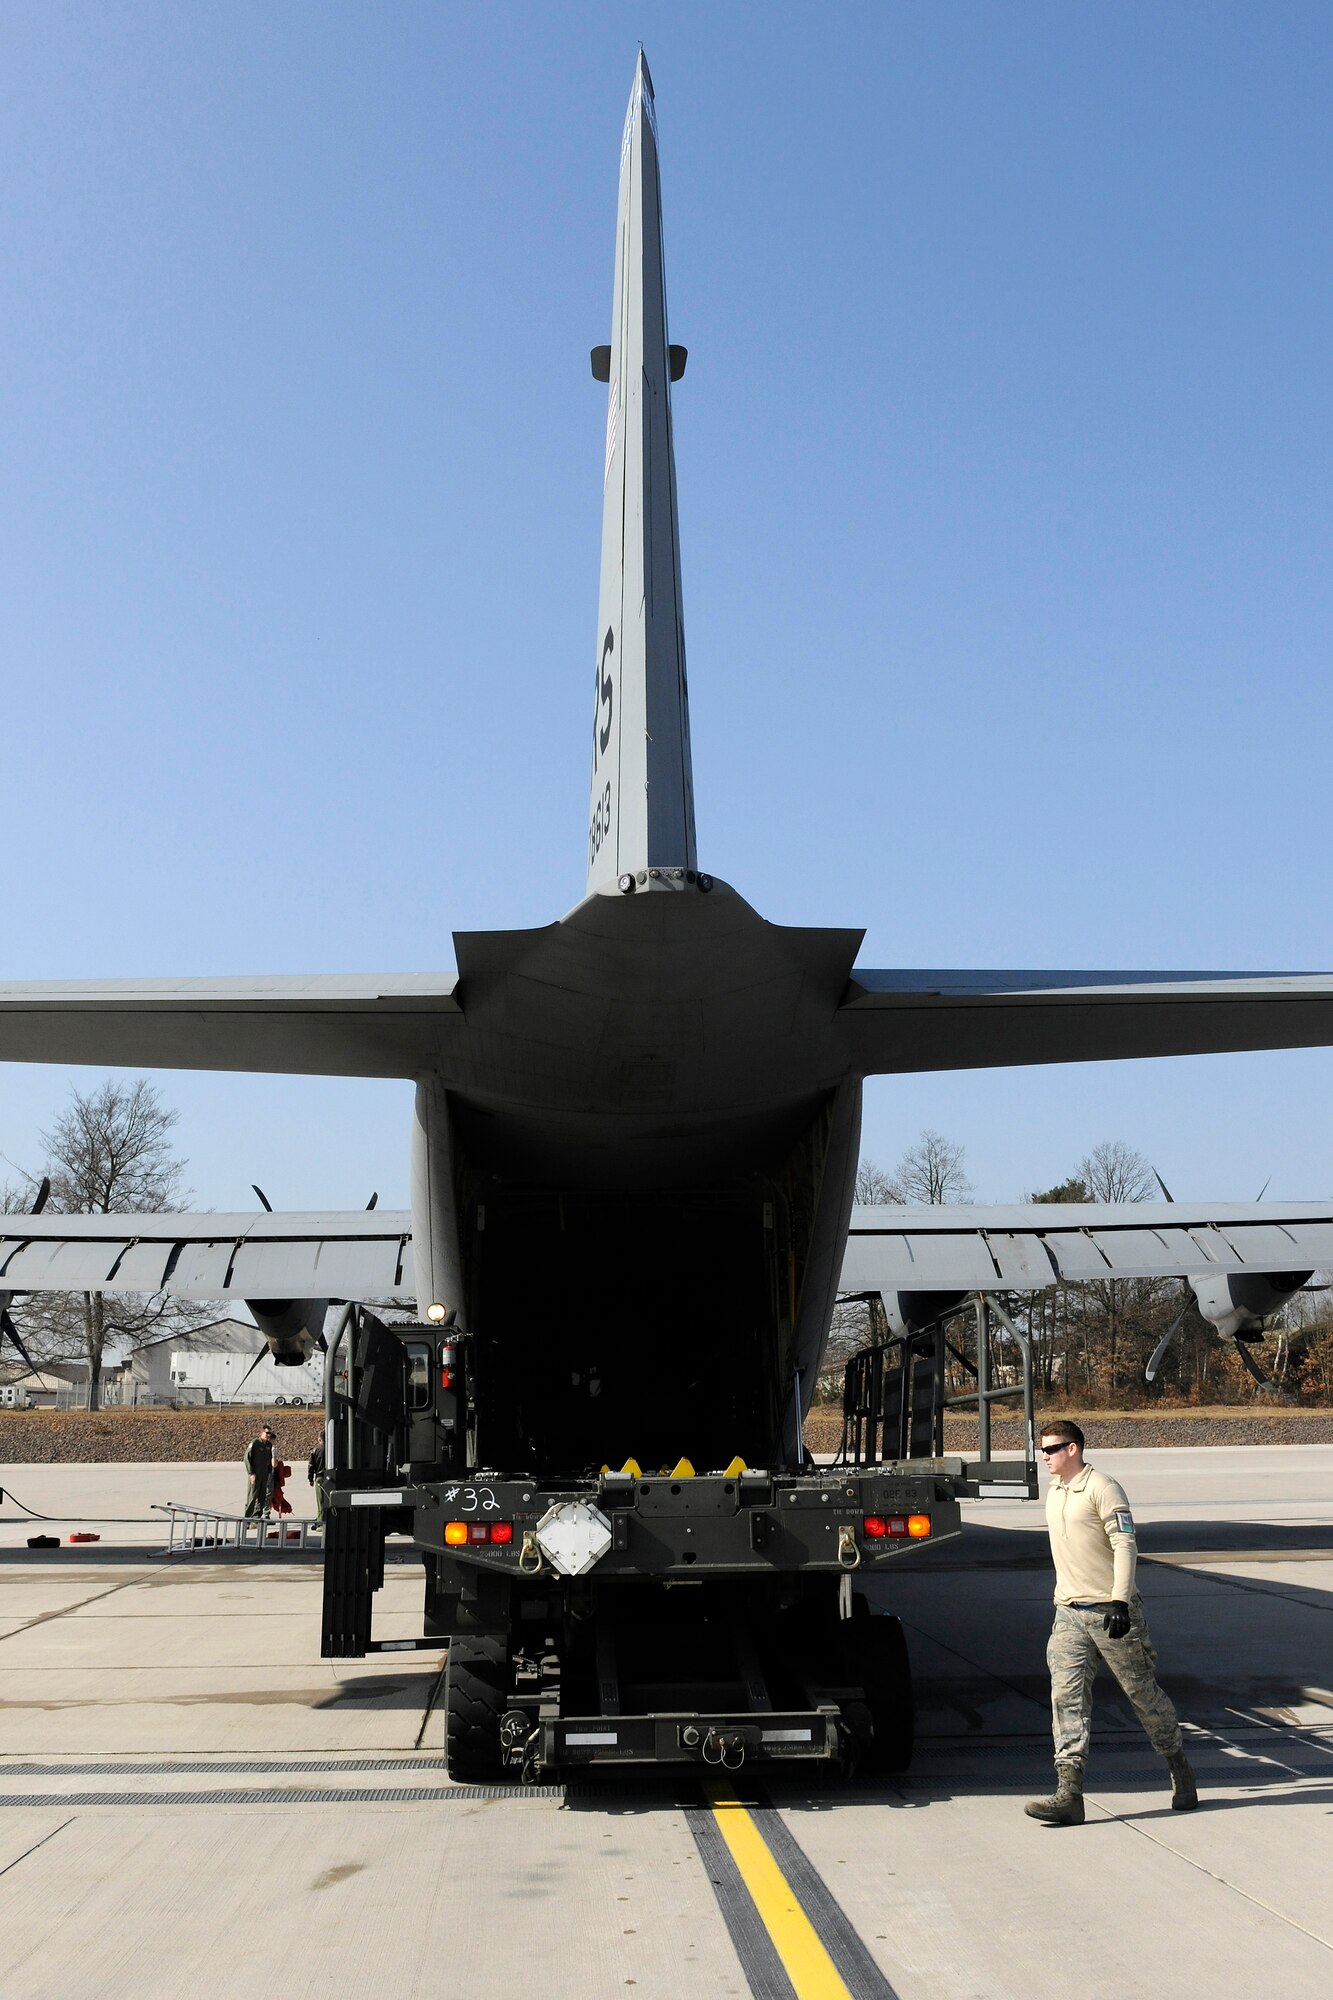 Members of the 86th Maintenance Group unload a C-130J after a ten-bundle container deployment system drop mission, March 16, 2012 at Ramstein Air Base, Germany.  The cargo was dropped in order to support field-training exercises for the 173rd Airborne Brigade Combat Team from Vicenza, Italy. This training gave pilots and loadmasters here an opportunity to practice this type of airdrop.  (U.S. Air Force photo/Staff Sgt. Chris Willis)